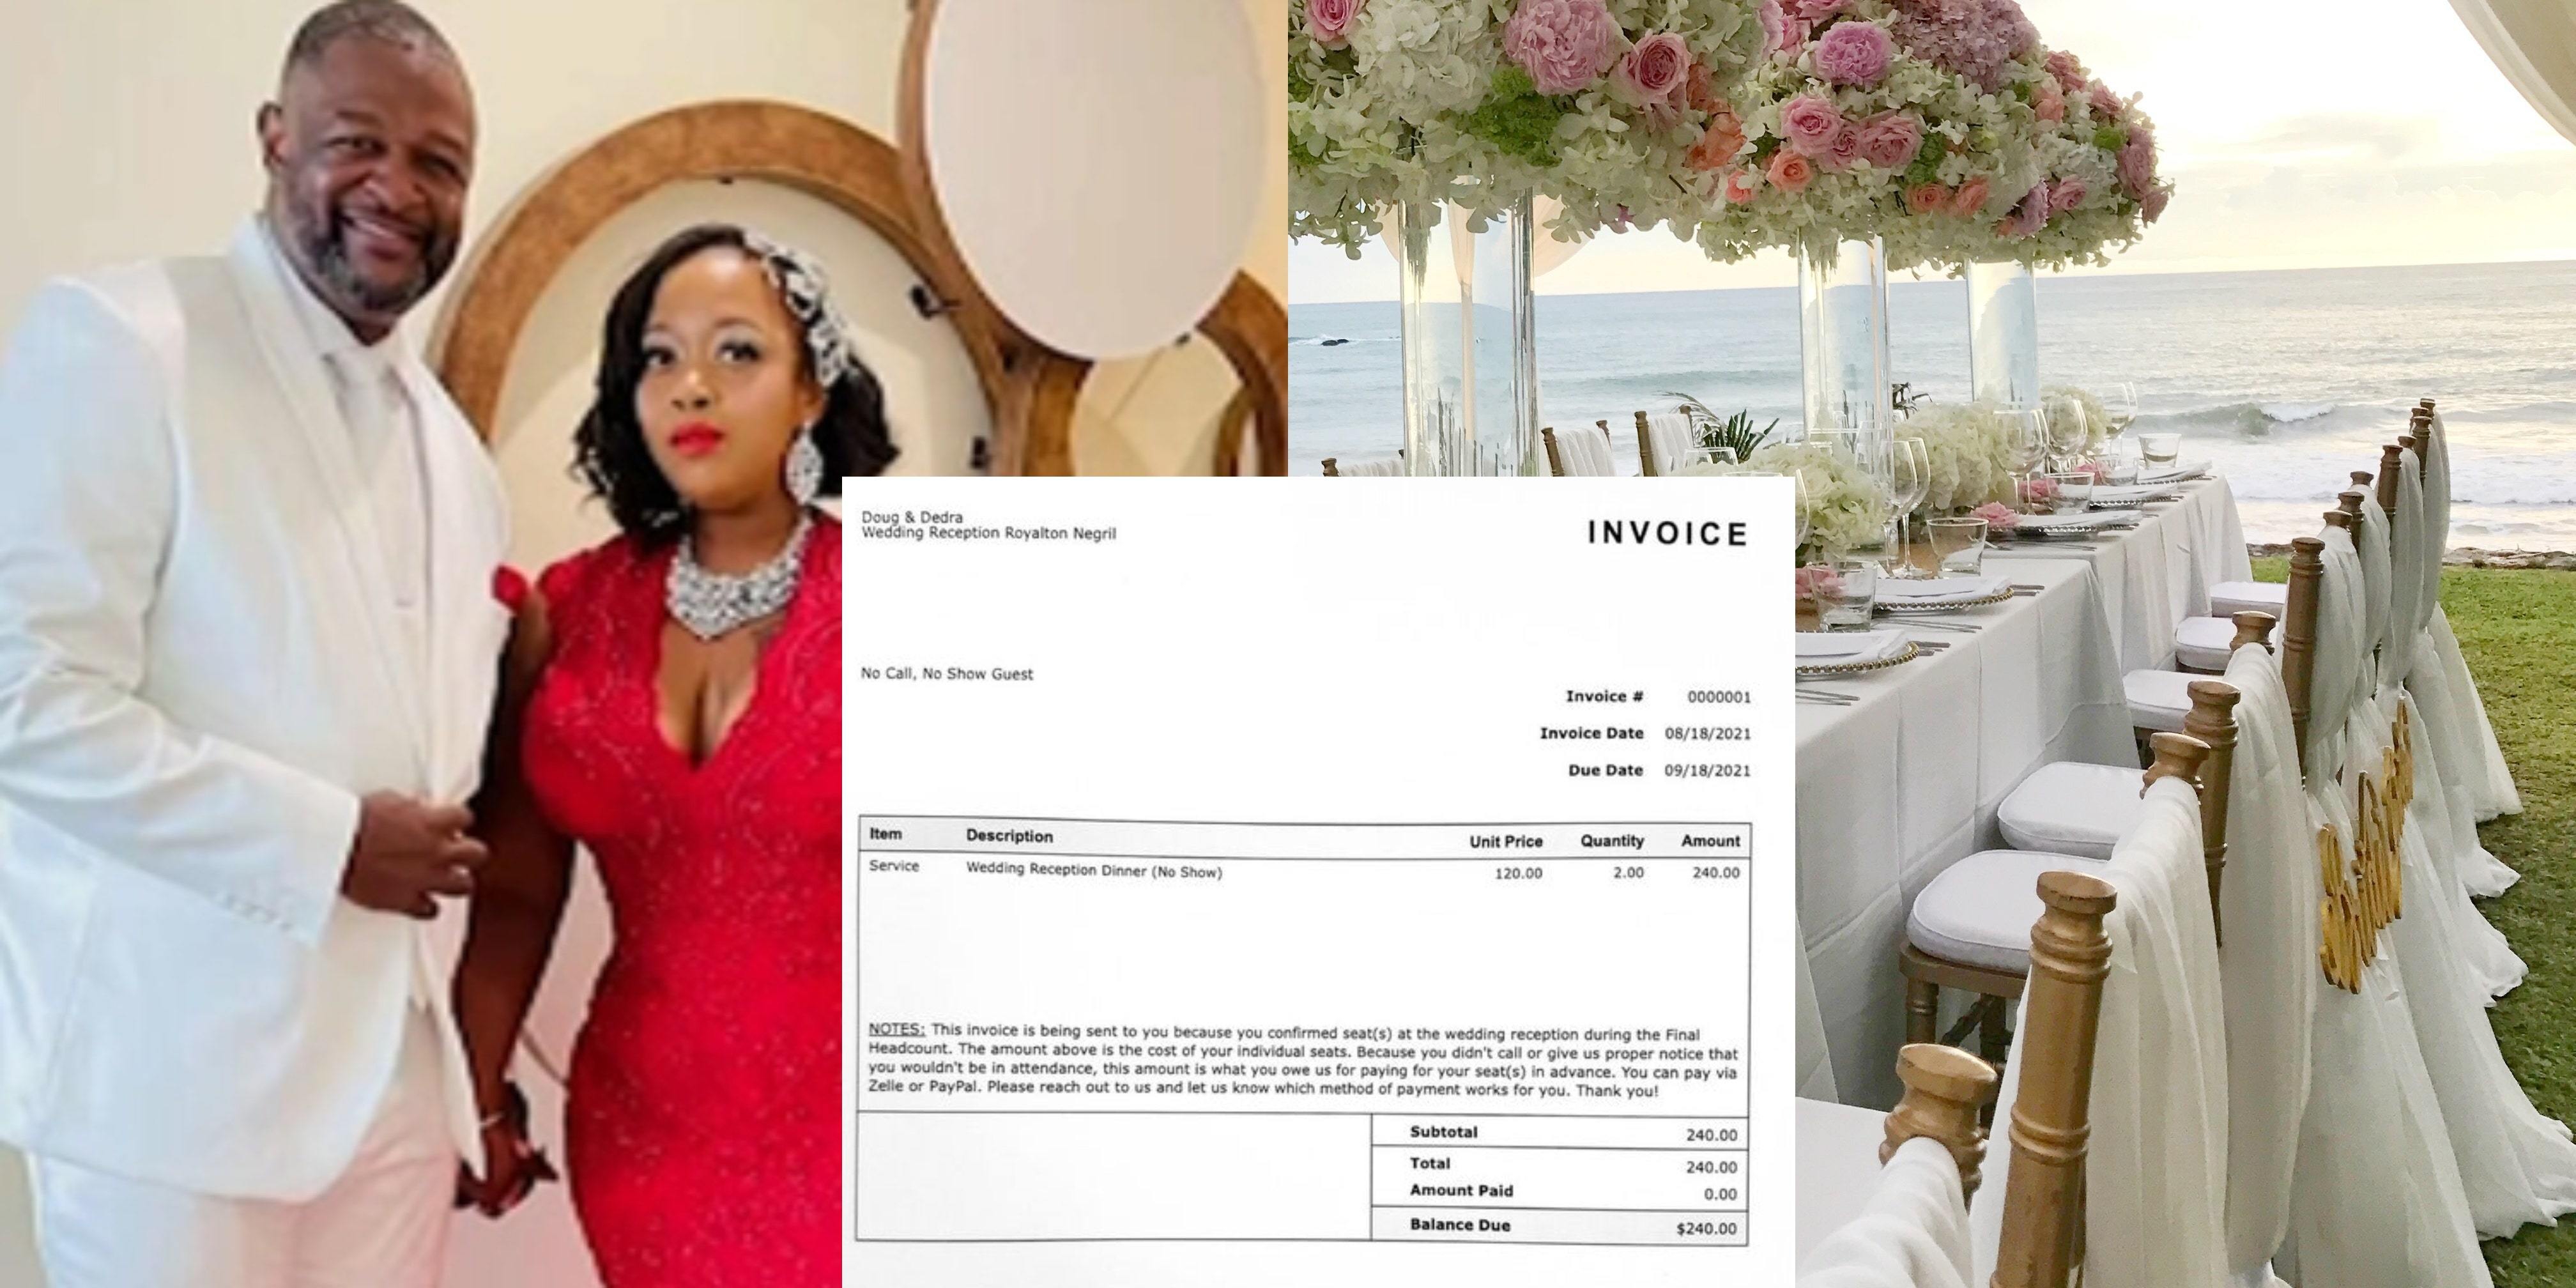 Newlyweds Post $240 Bill For No-Show Wedding Guests 